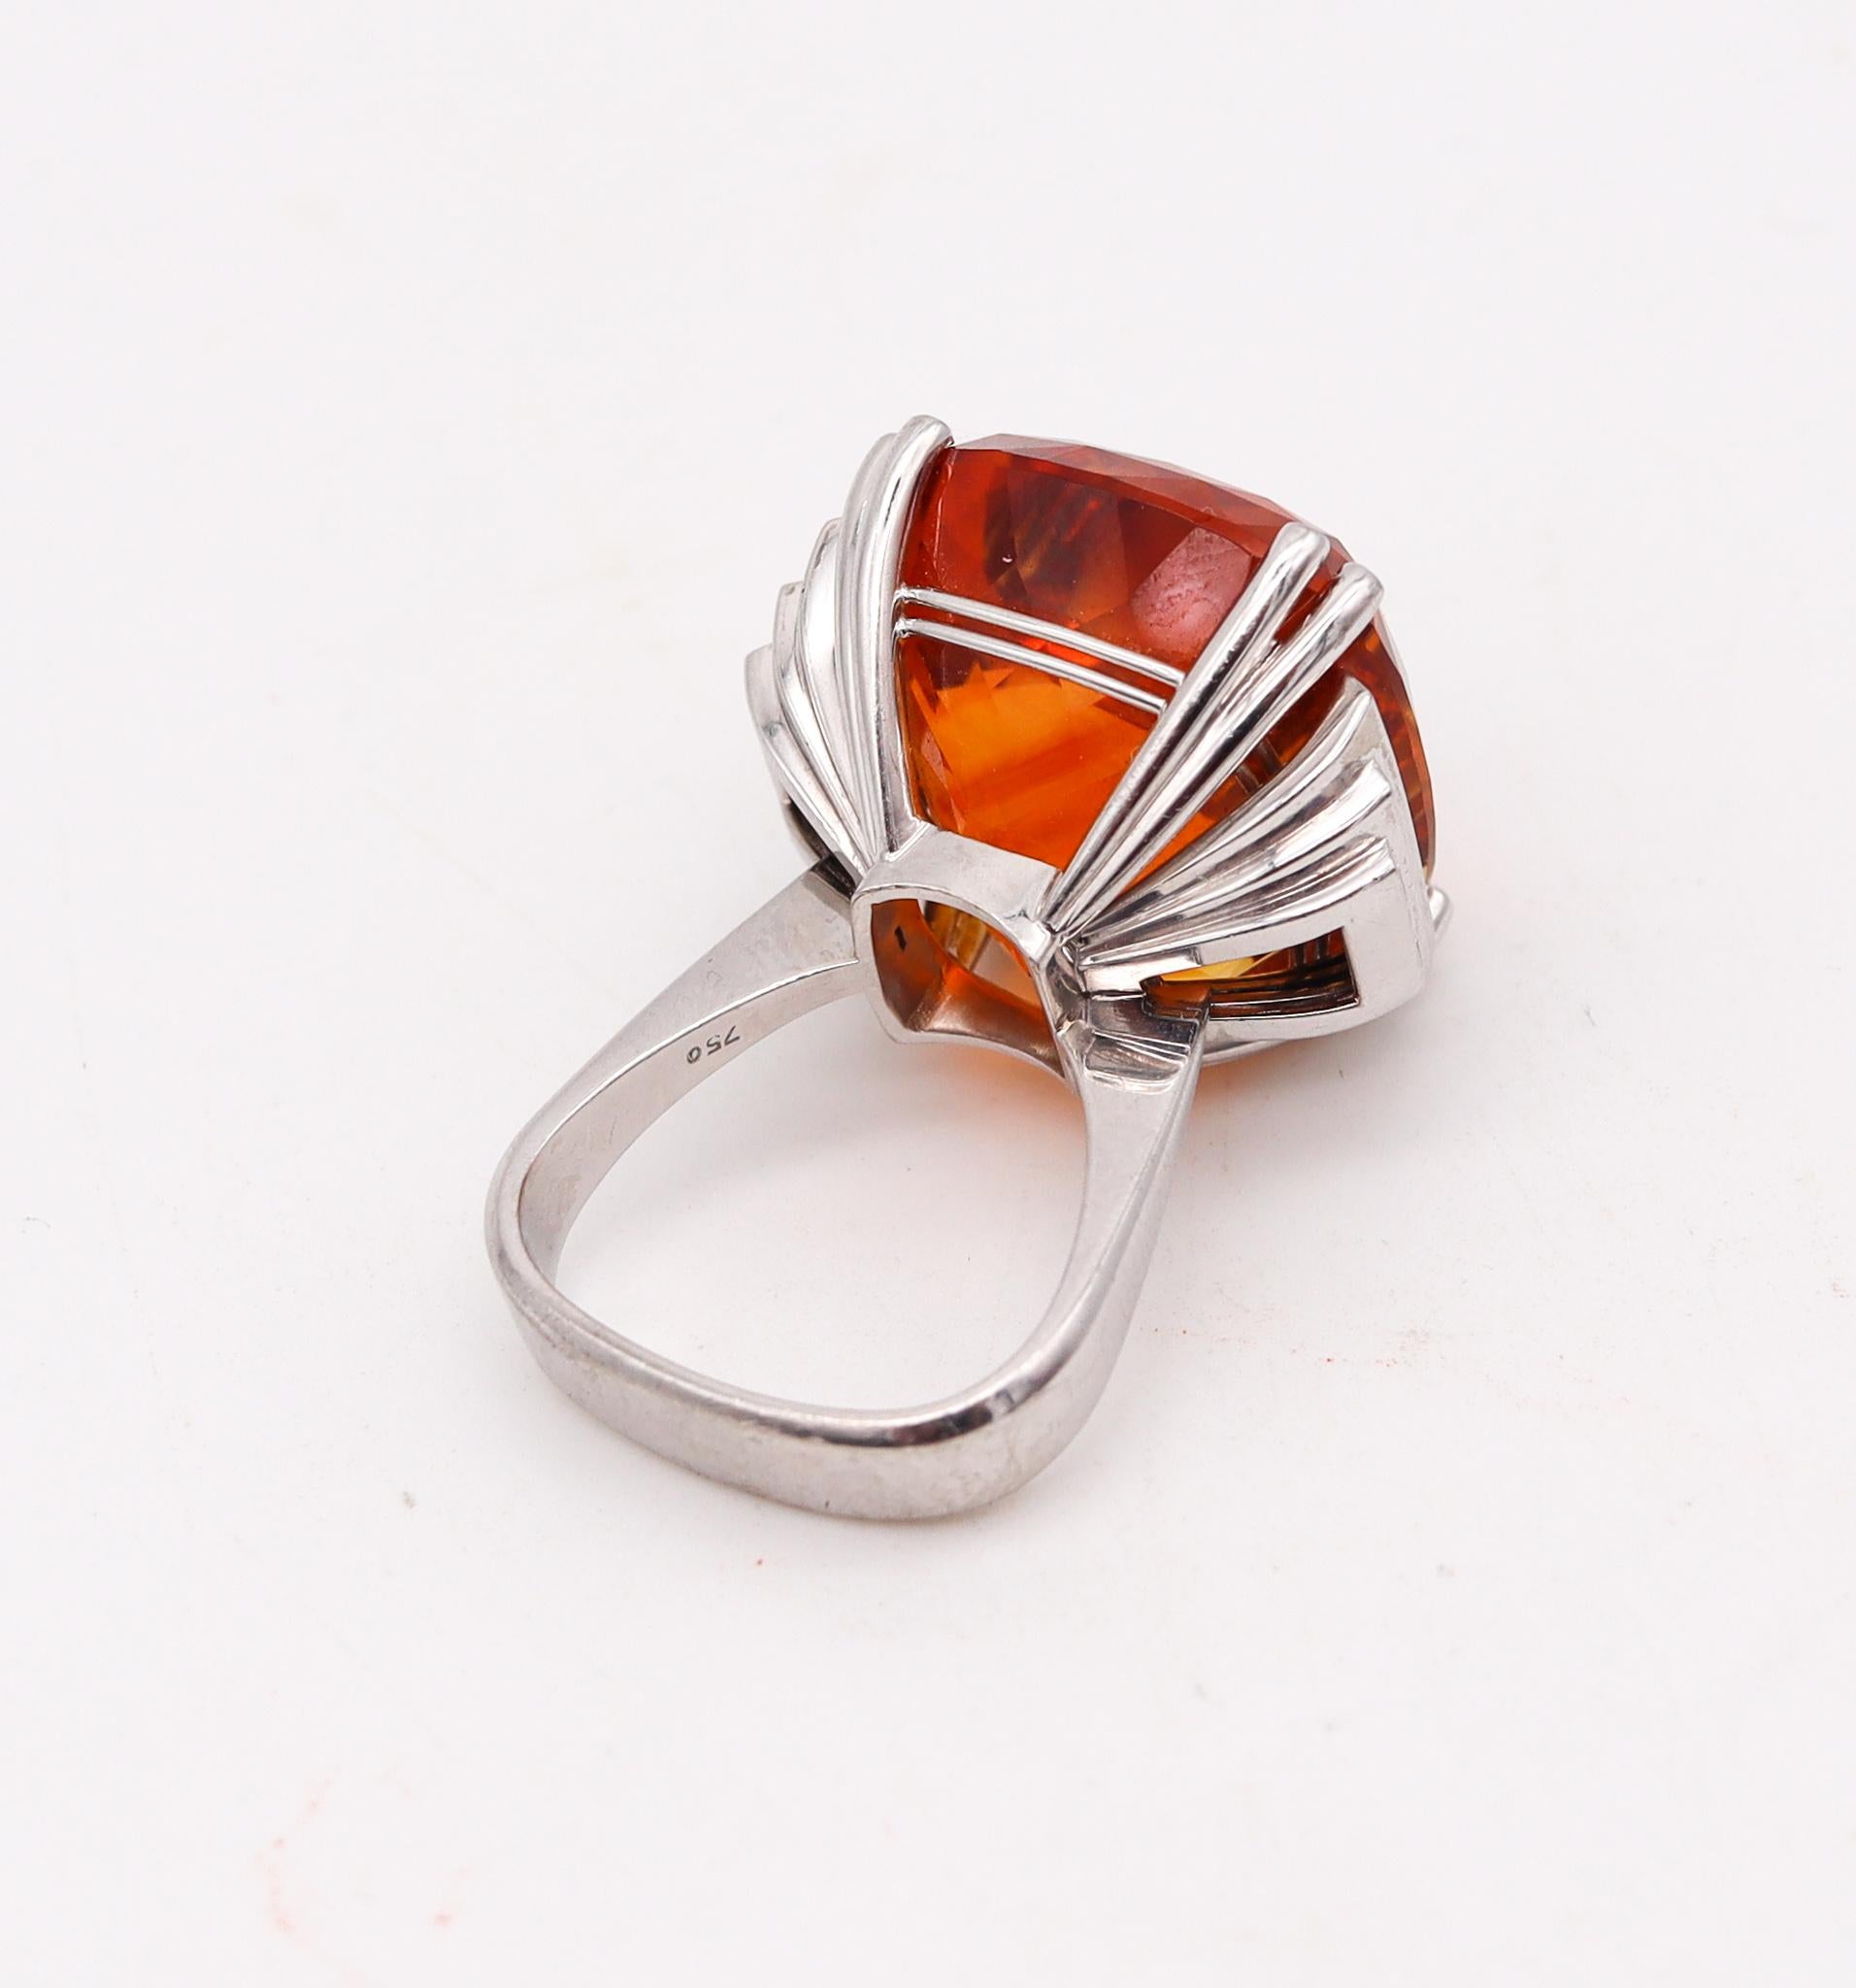 Georg Jensen & Wendel 1940 Art Deco Ring 18Kt Gold 49.41 Cts Diamonds Citrine In Excellent Condition For Sale In Miami, FL